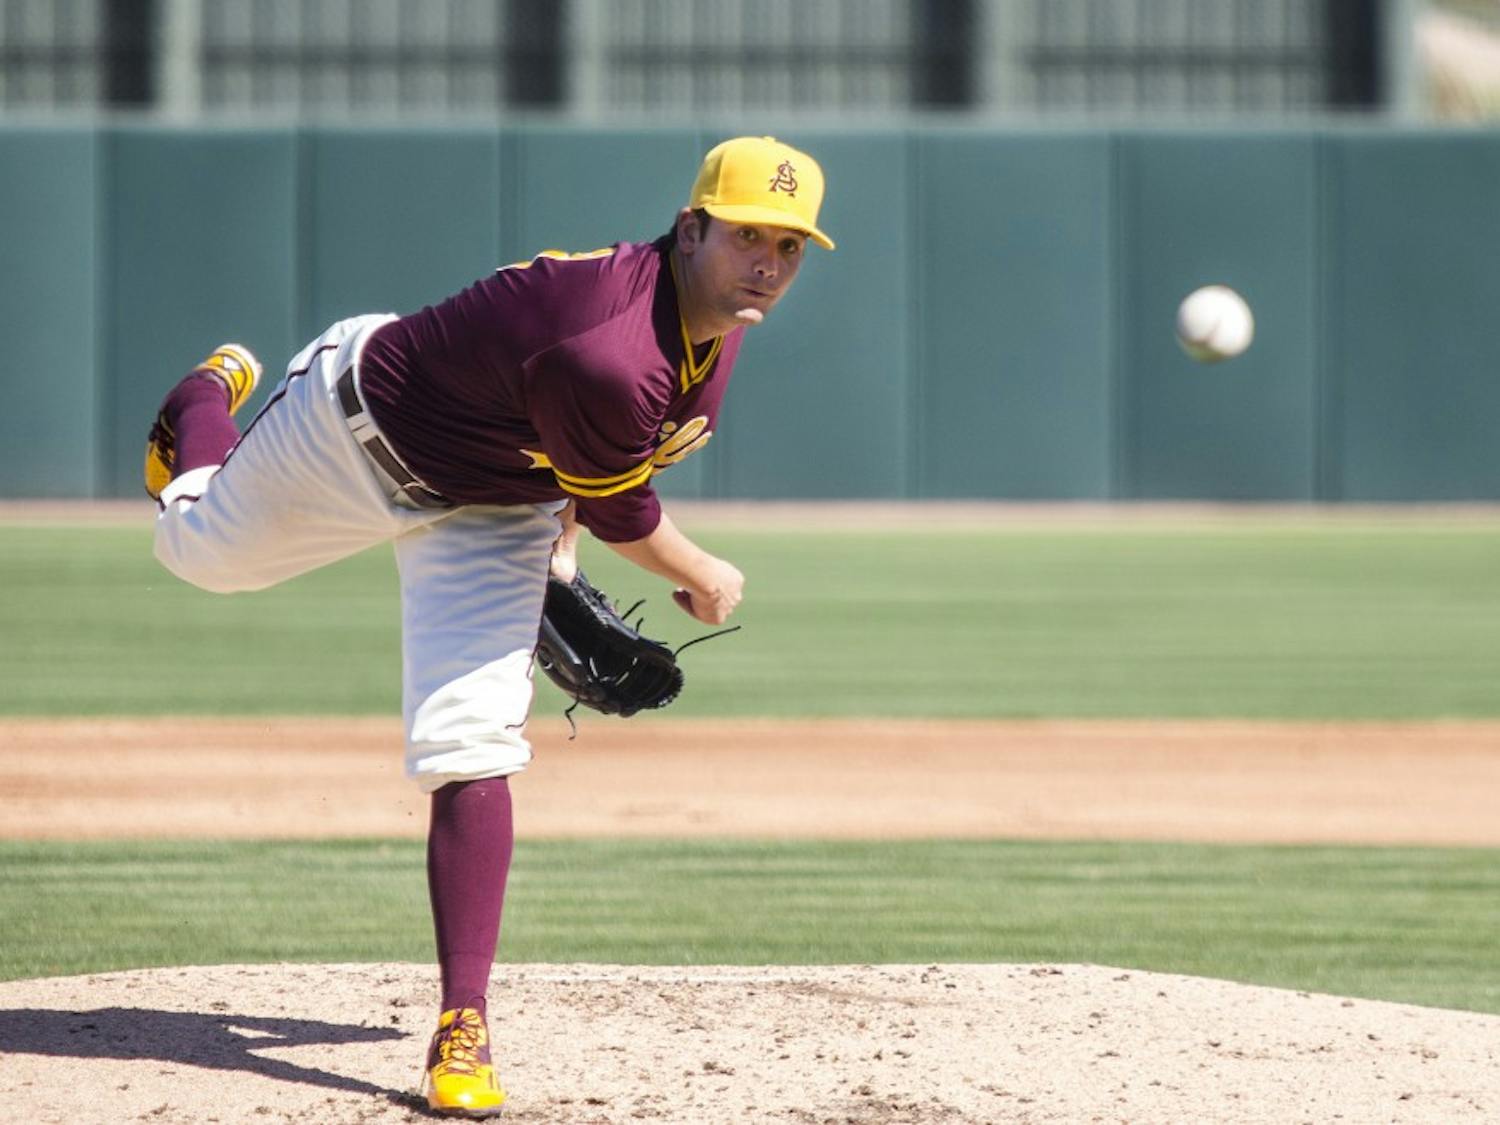 Junior pitcher Seth Martinez pitches during a game against Xavier at Phoenix Municipal Stadium on Saturday, Feb. 20, 2016. The Sun Devils won the matchup, 2-1.  